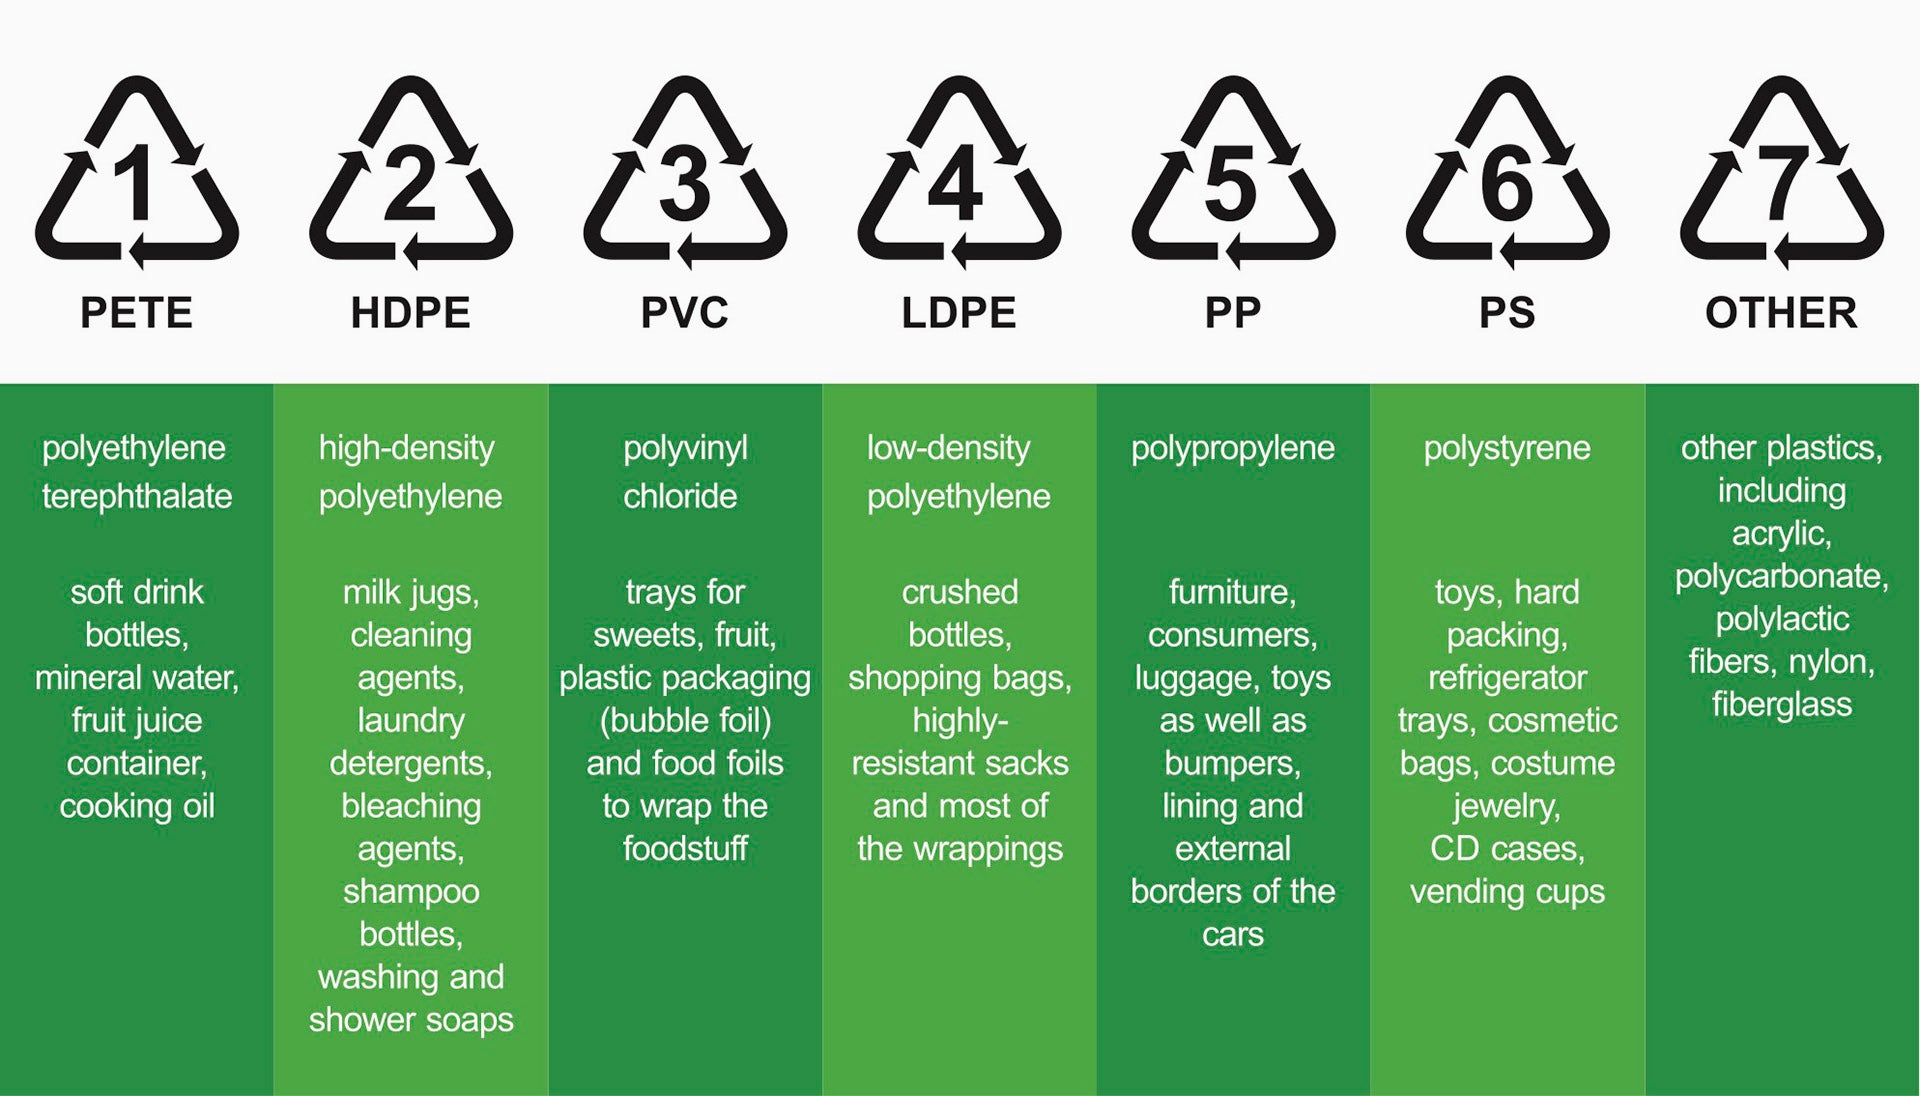 Chart showing the different recycling codes and materials